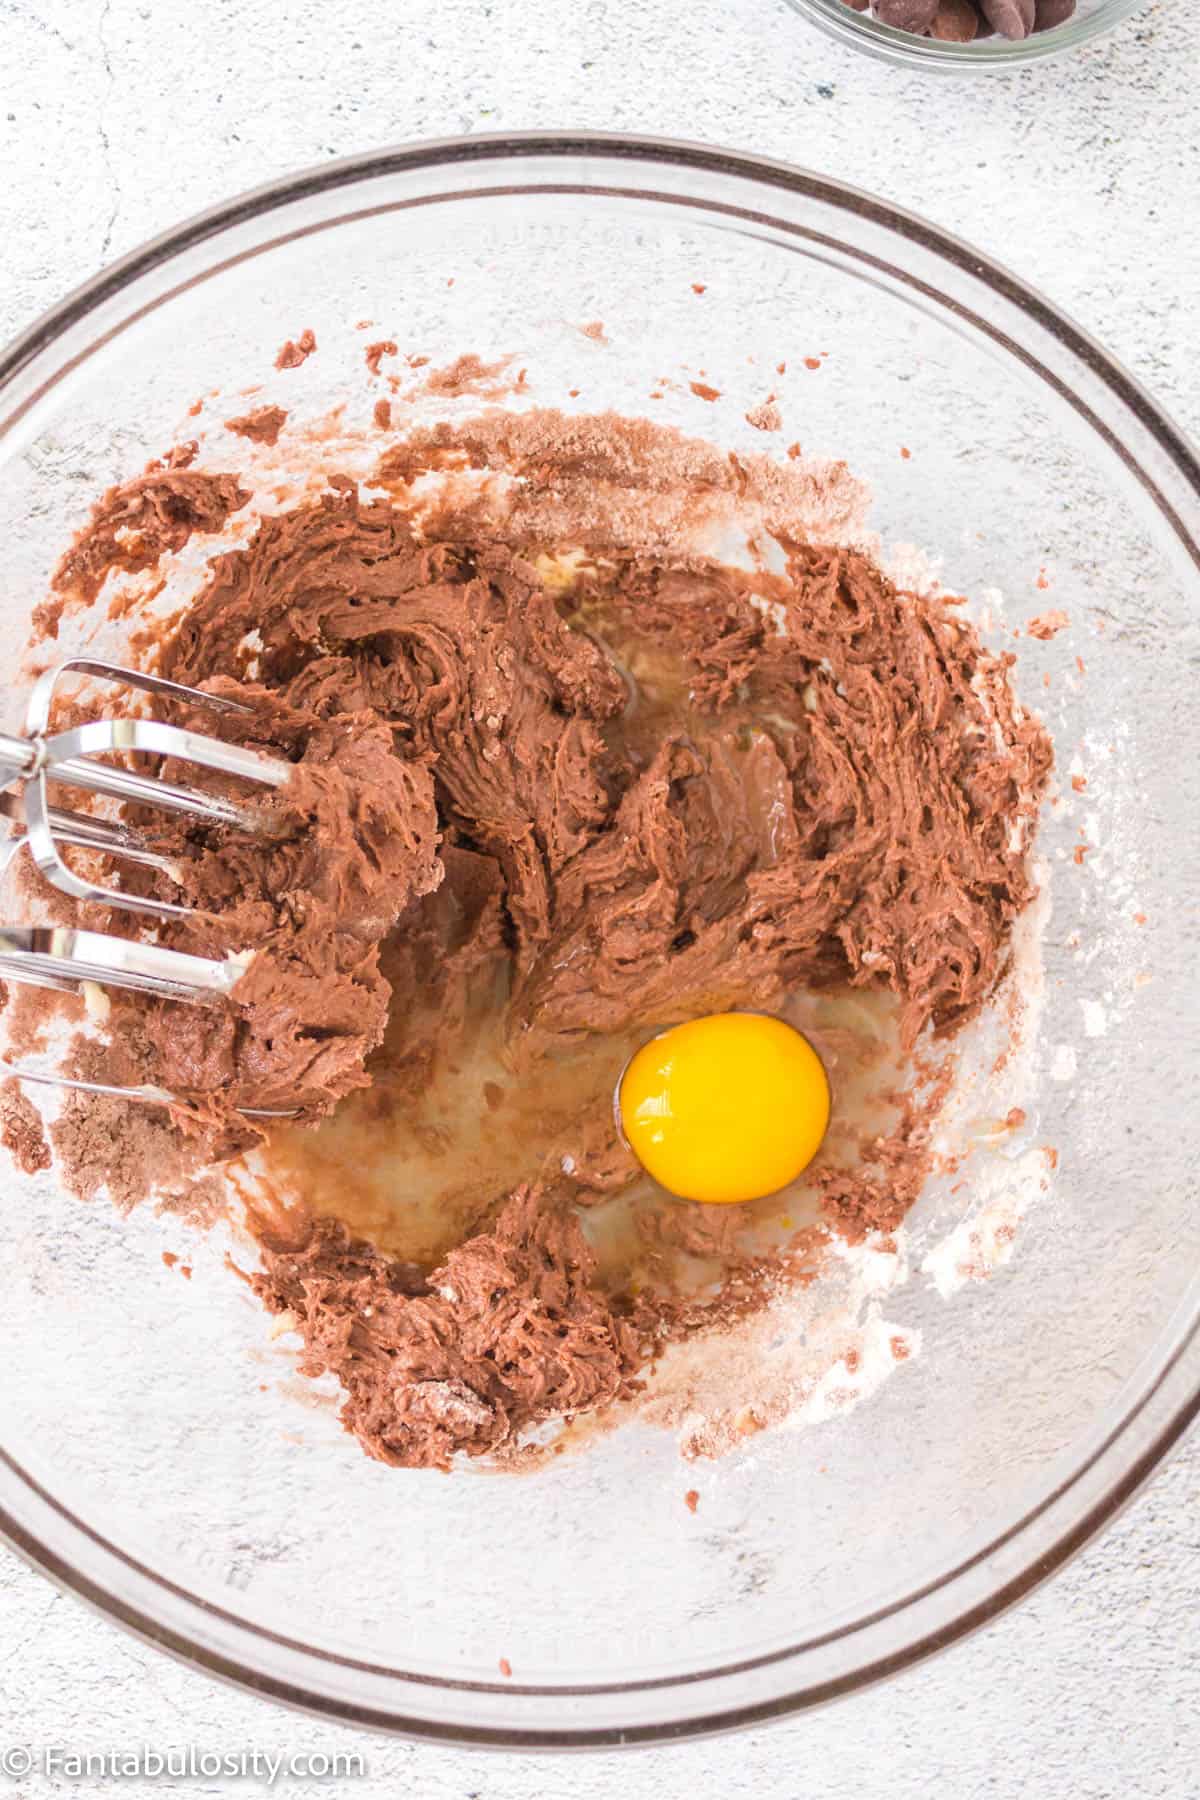 Brownie mix with egg, milk and other ingredients in glass bowl.